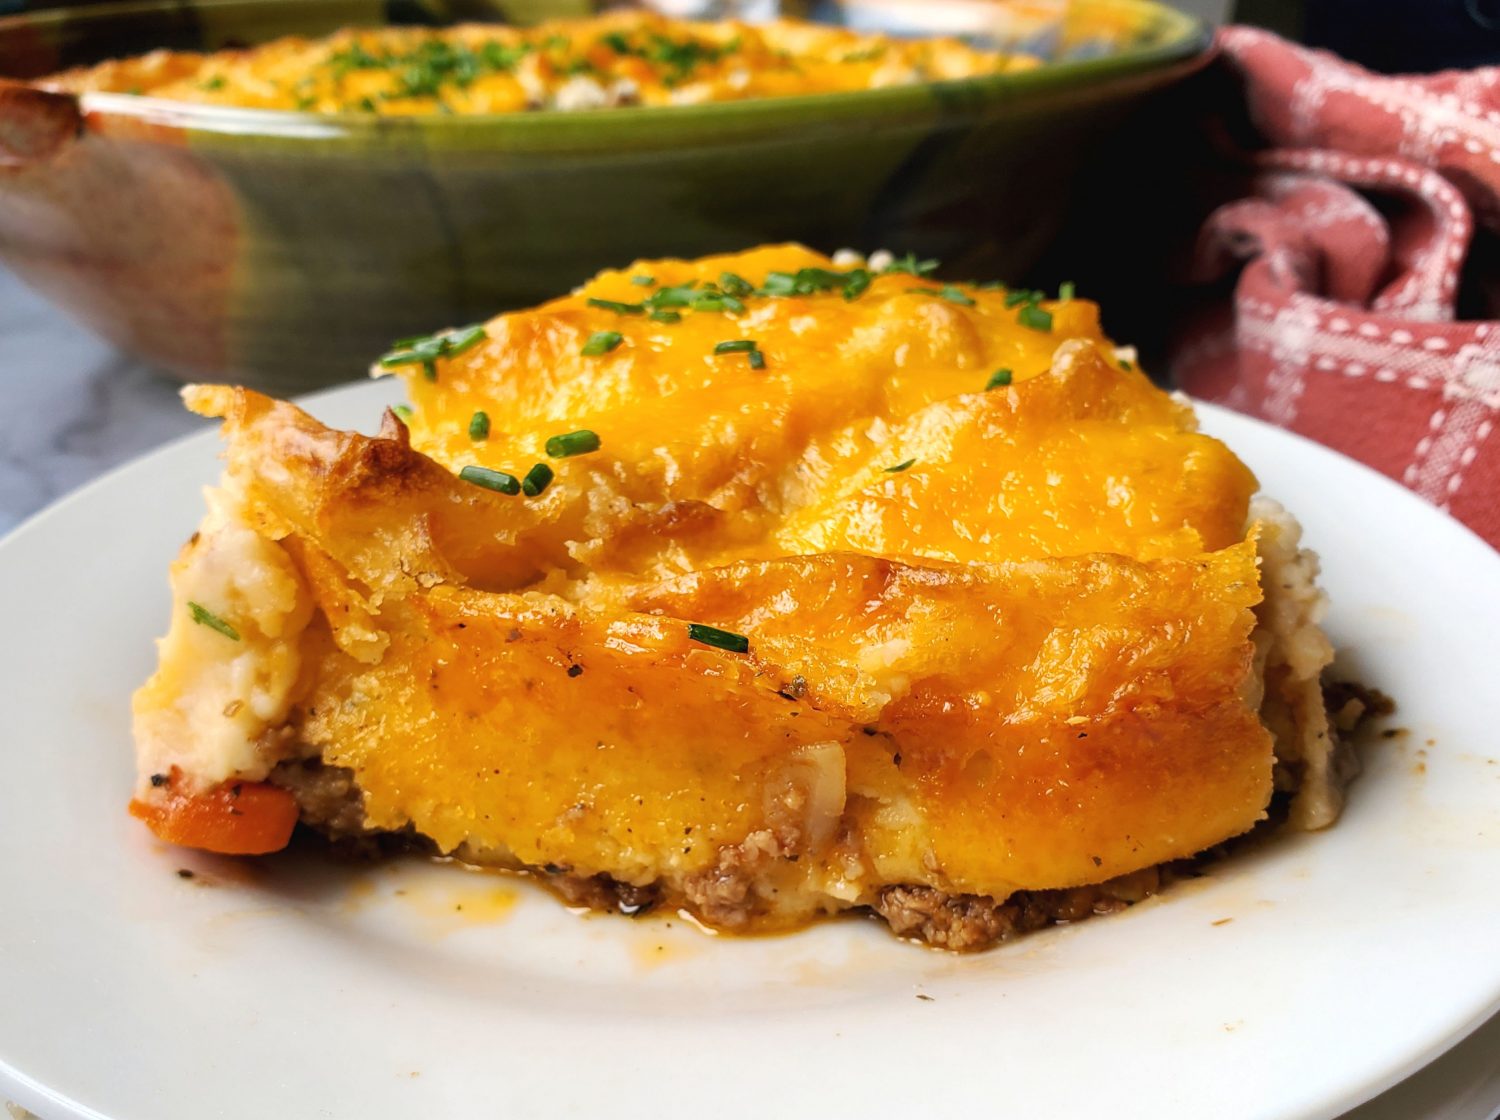 Twice-Baked Shepherds Pie: Tasty comfort food easily catered to your family's favorite veggies, topped with ranch mashed potatoes & cheese.